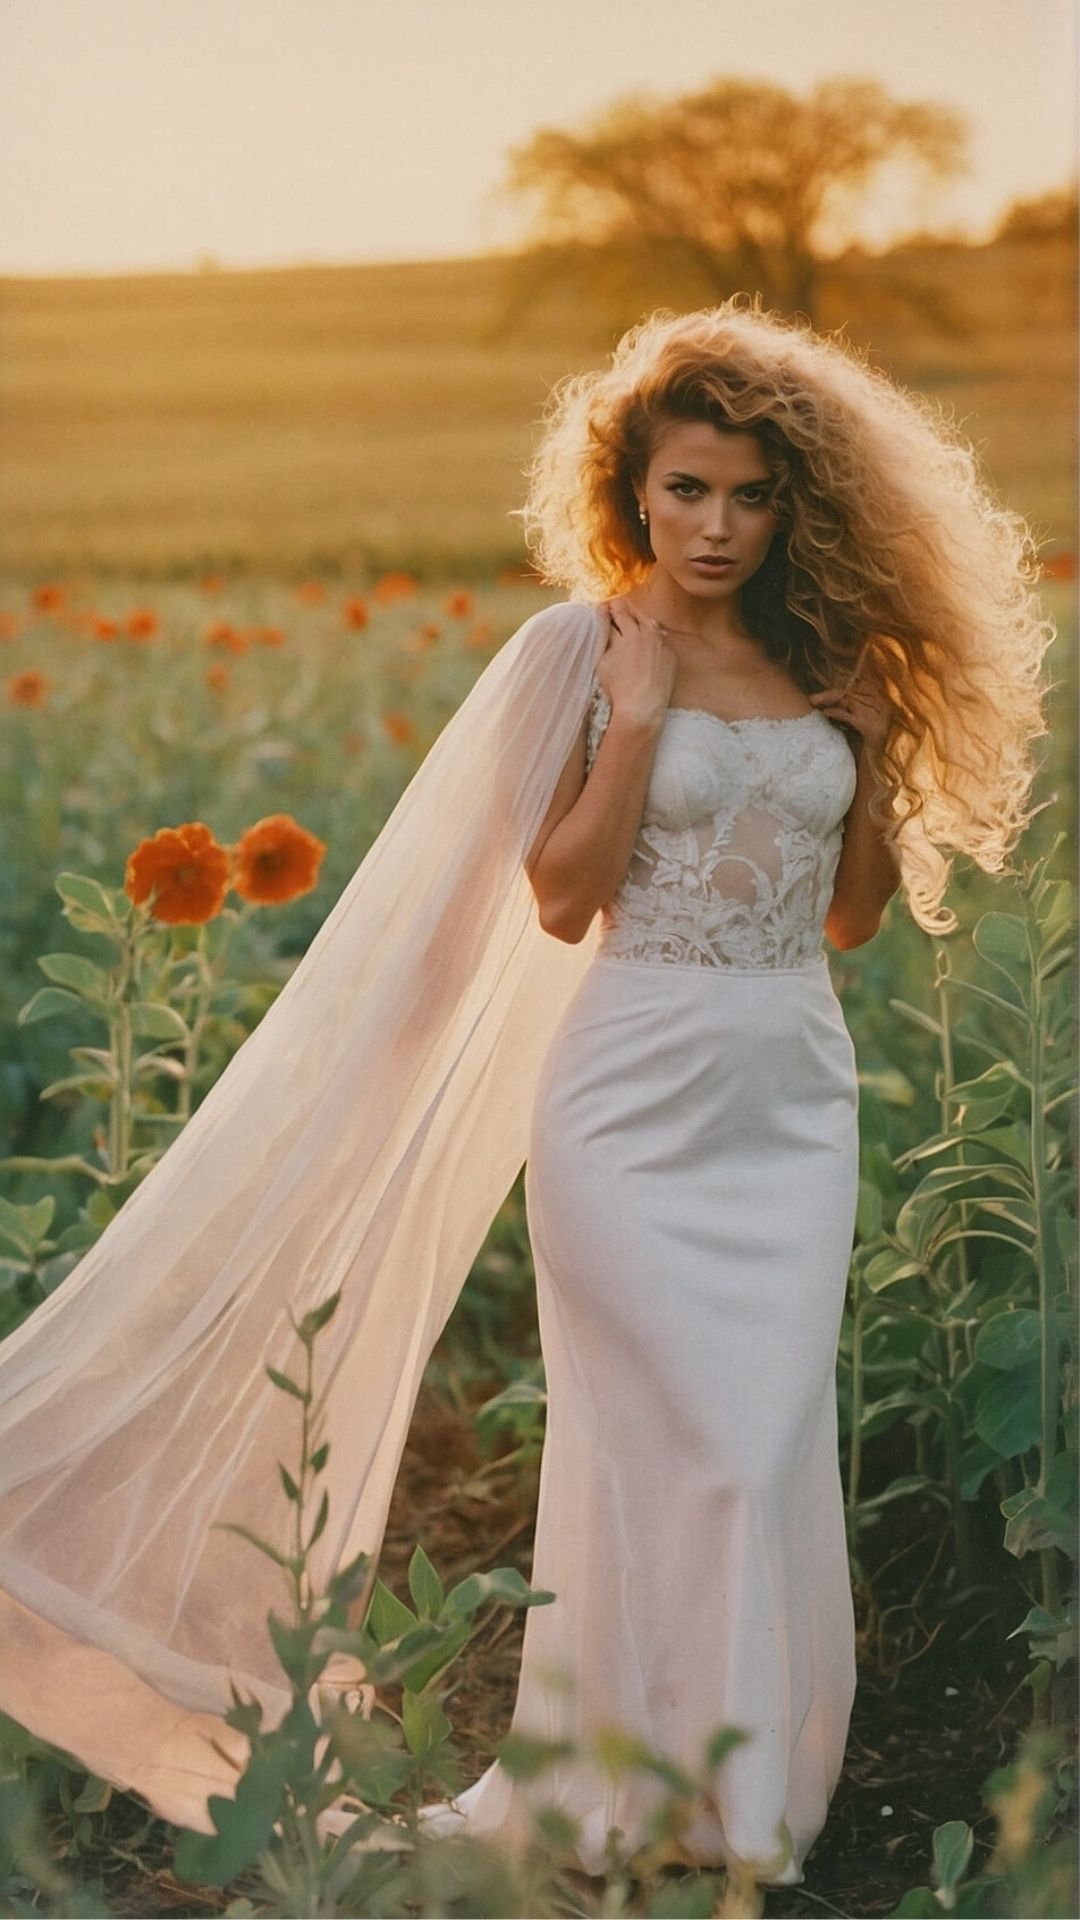 Sunset Glow: Floral Lace Gown Amidst Wildflowers